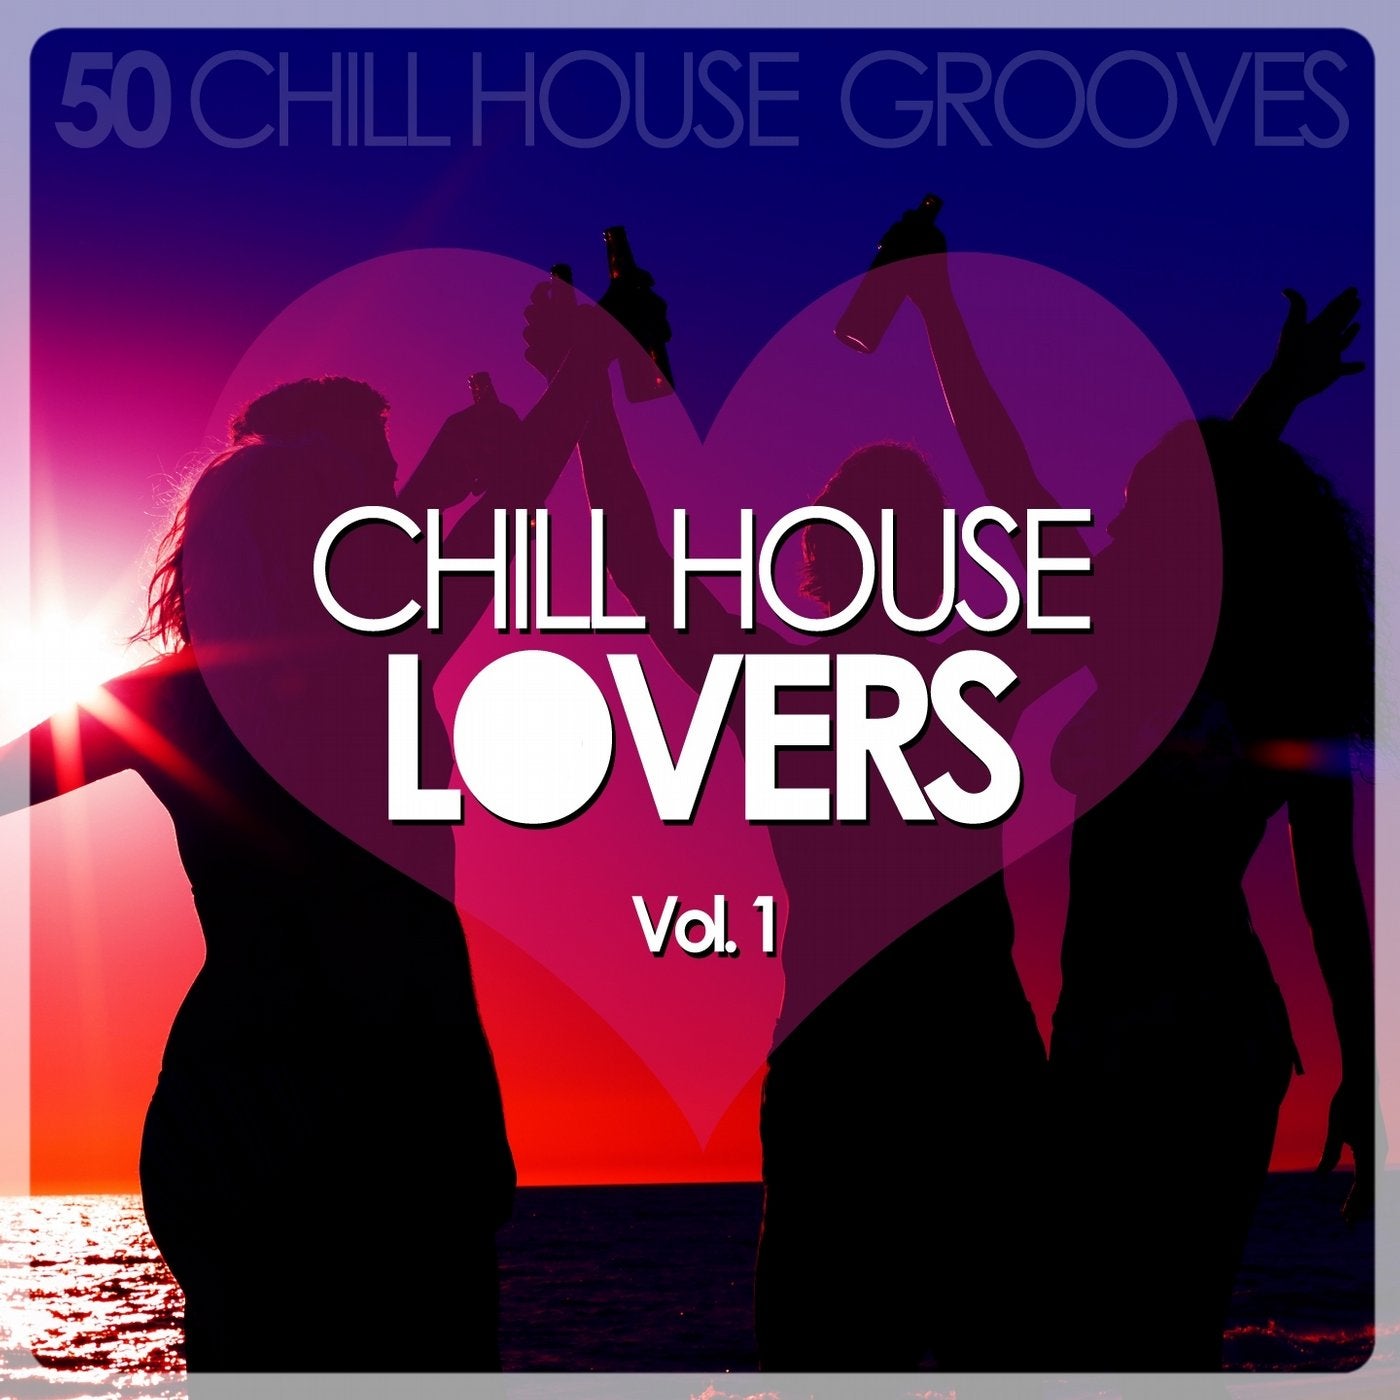 Chill House Lovers, Vol. 1 (50 Chill House Grooves)